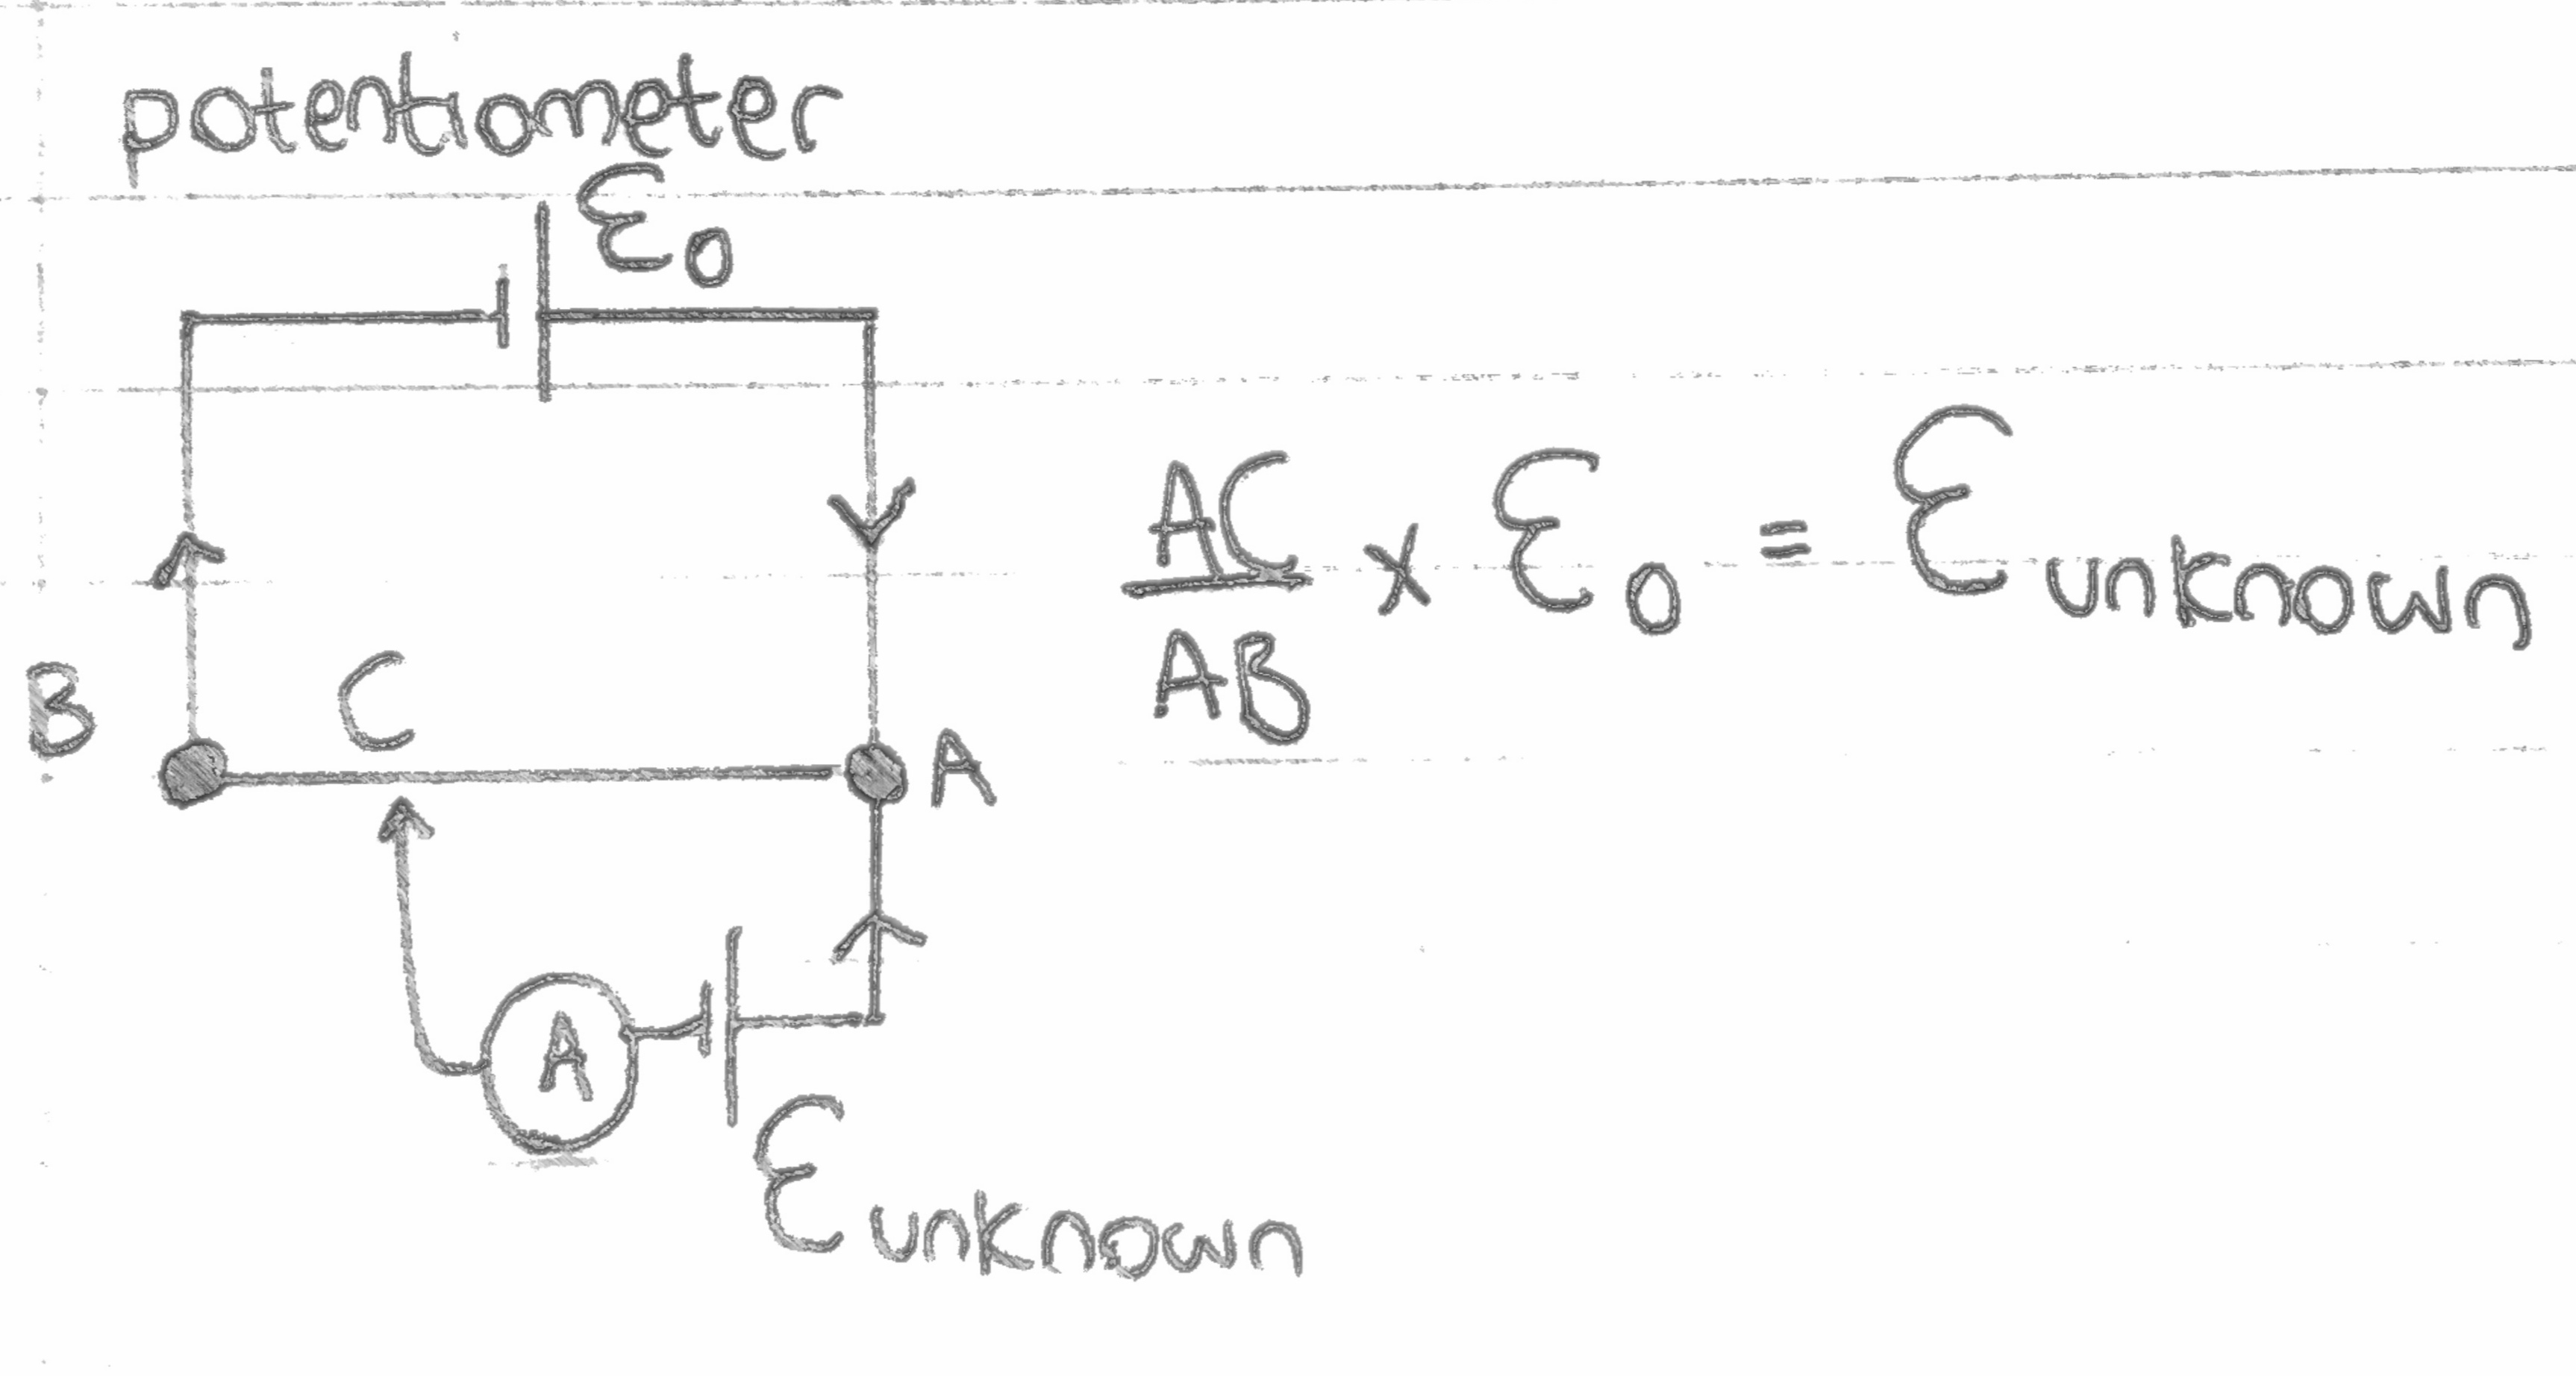 A diagram of a potentiometer and how it is used to compare or find the emf of the unknown cell